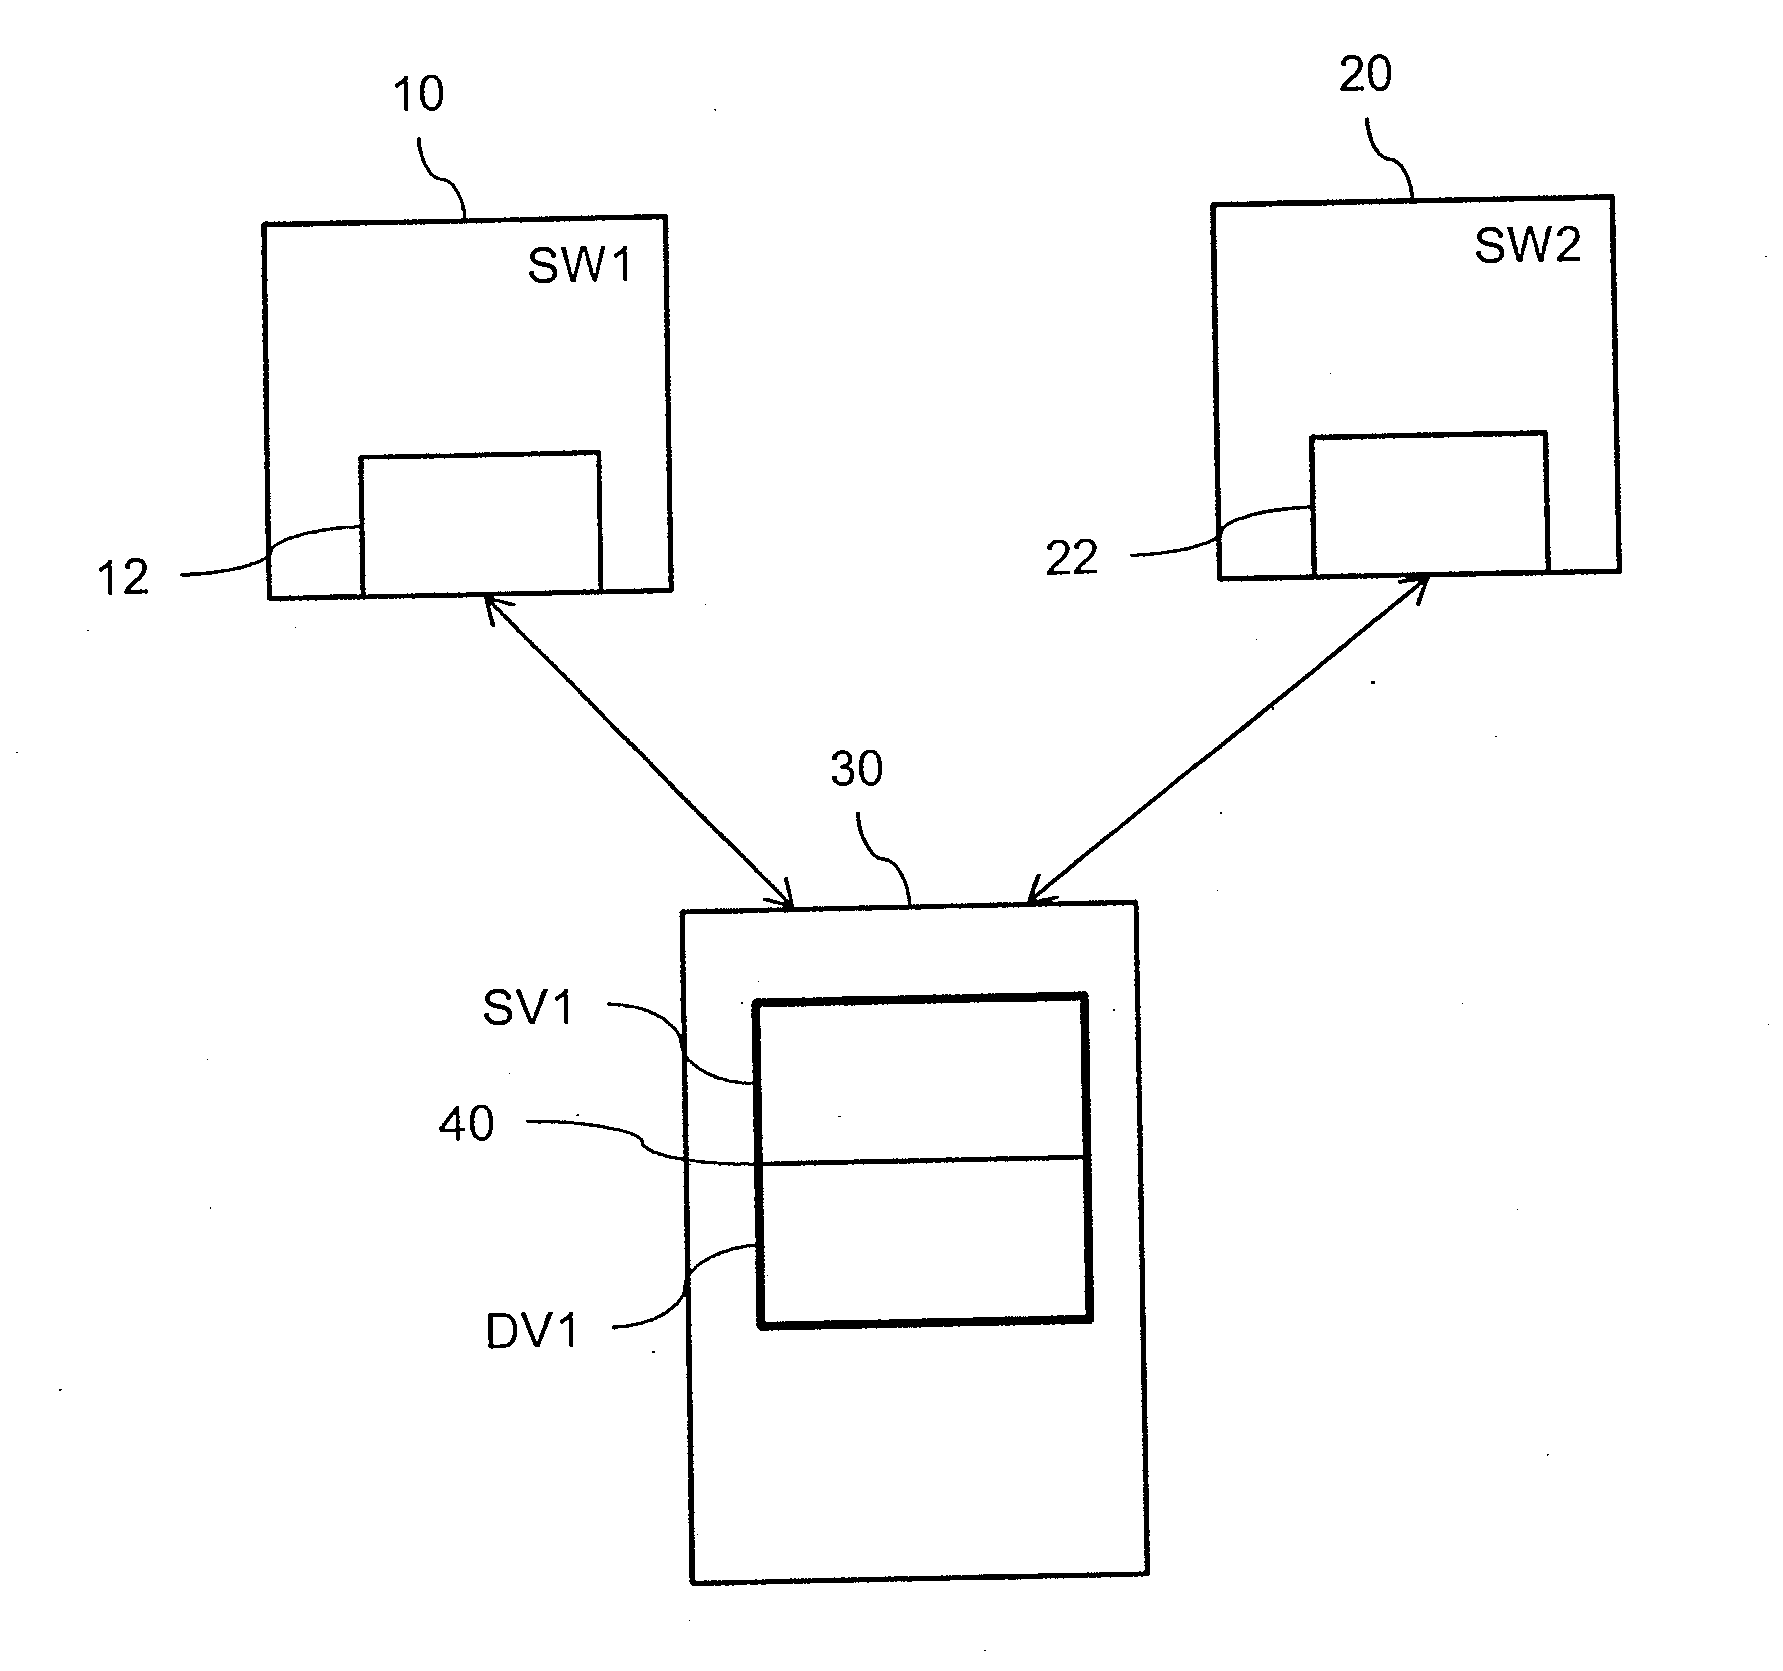 Method for Operating a Control Device for Controlling a Technical Installation